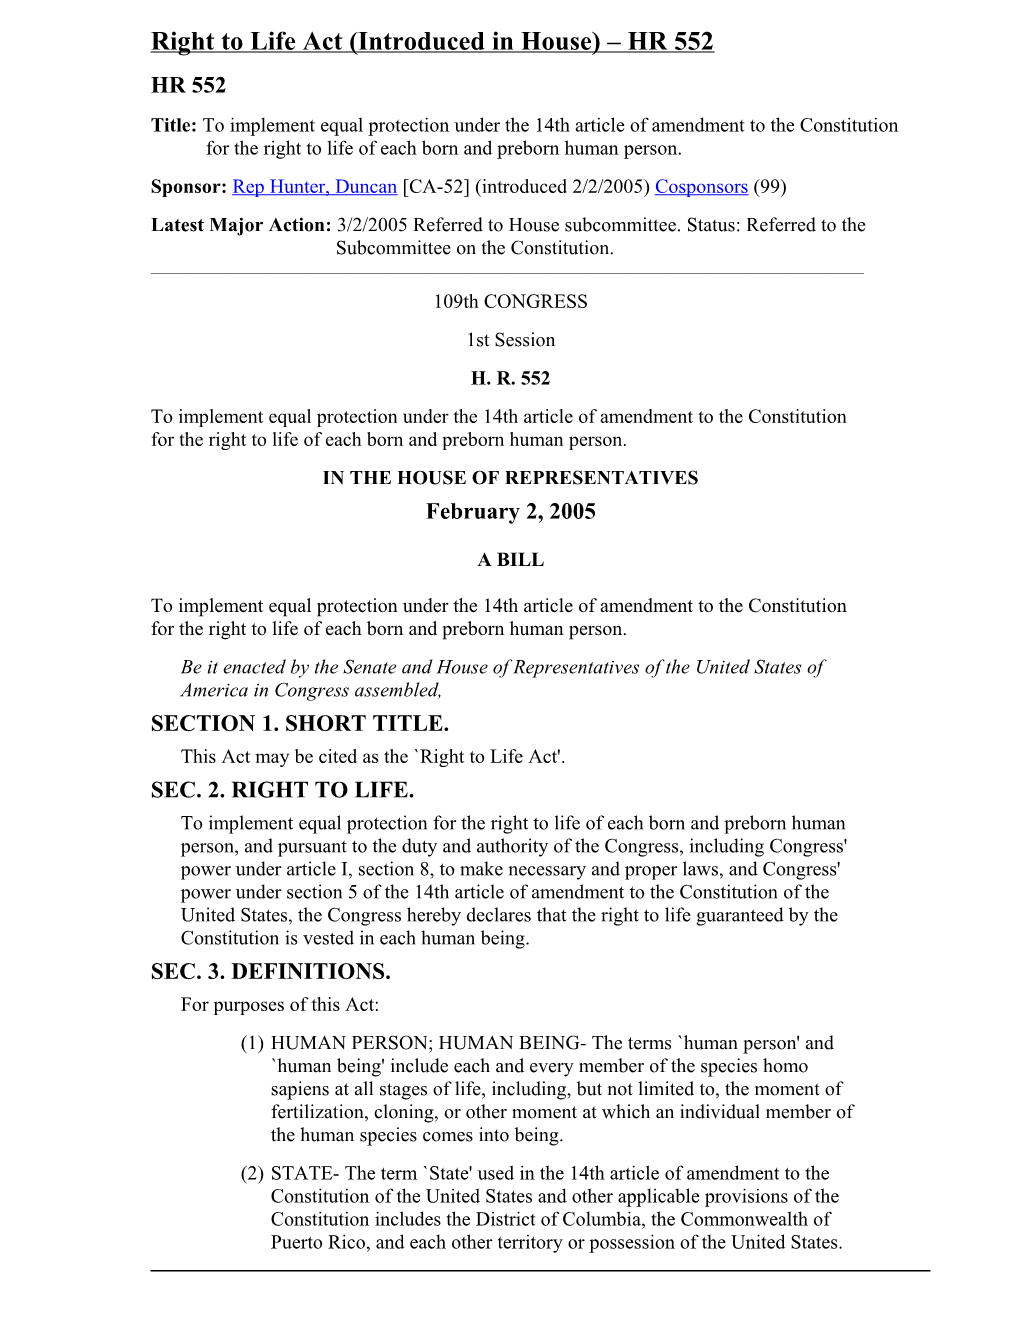 Right to Life Act (Introduced in House) HR 552